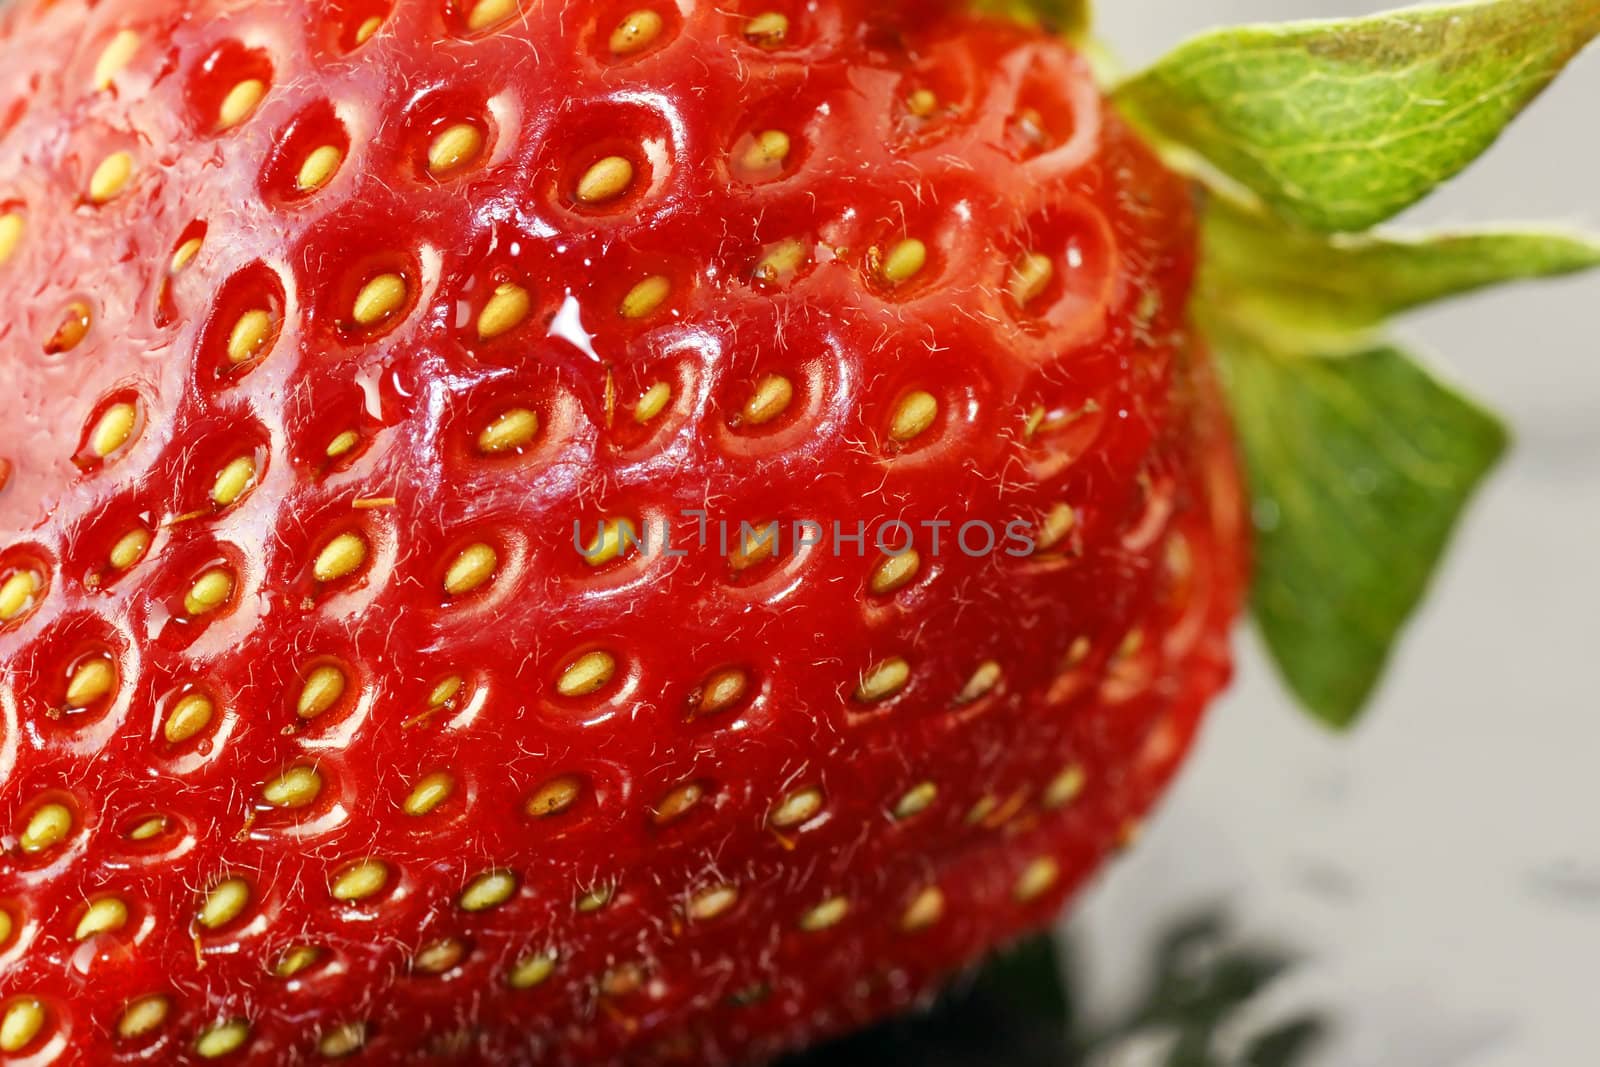 Bright red juicy ripe strawberry with water droplets macro: delicious and nutritious